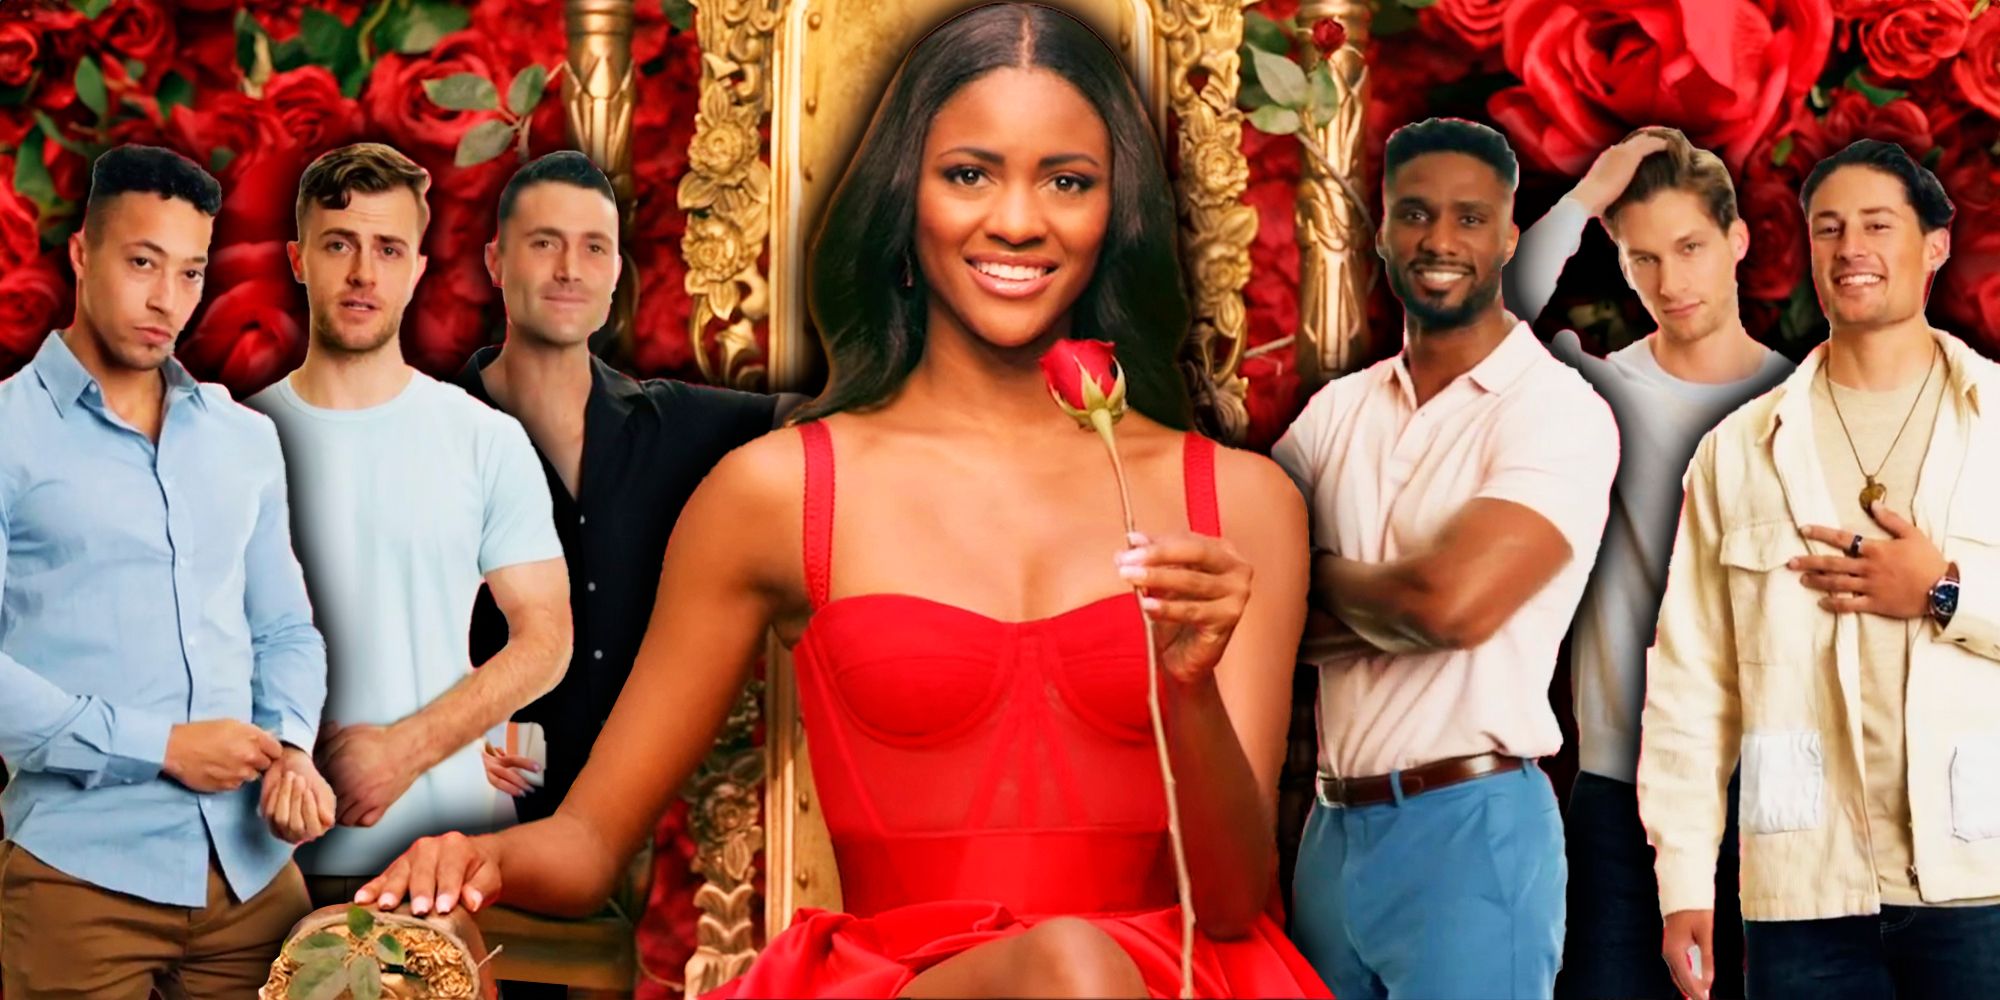 The Bachelorette's Charity Lawson and 6 of her suitors in front of roses